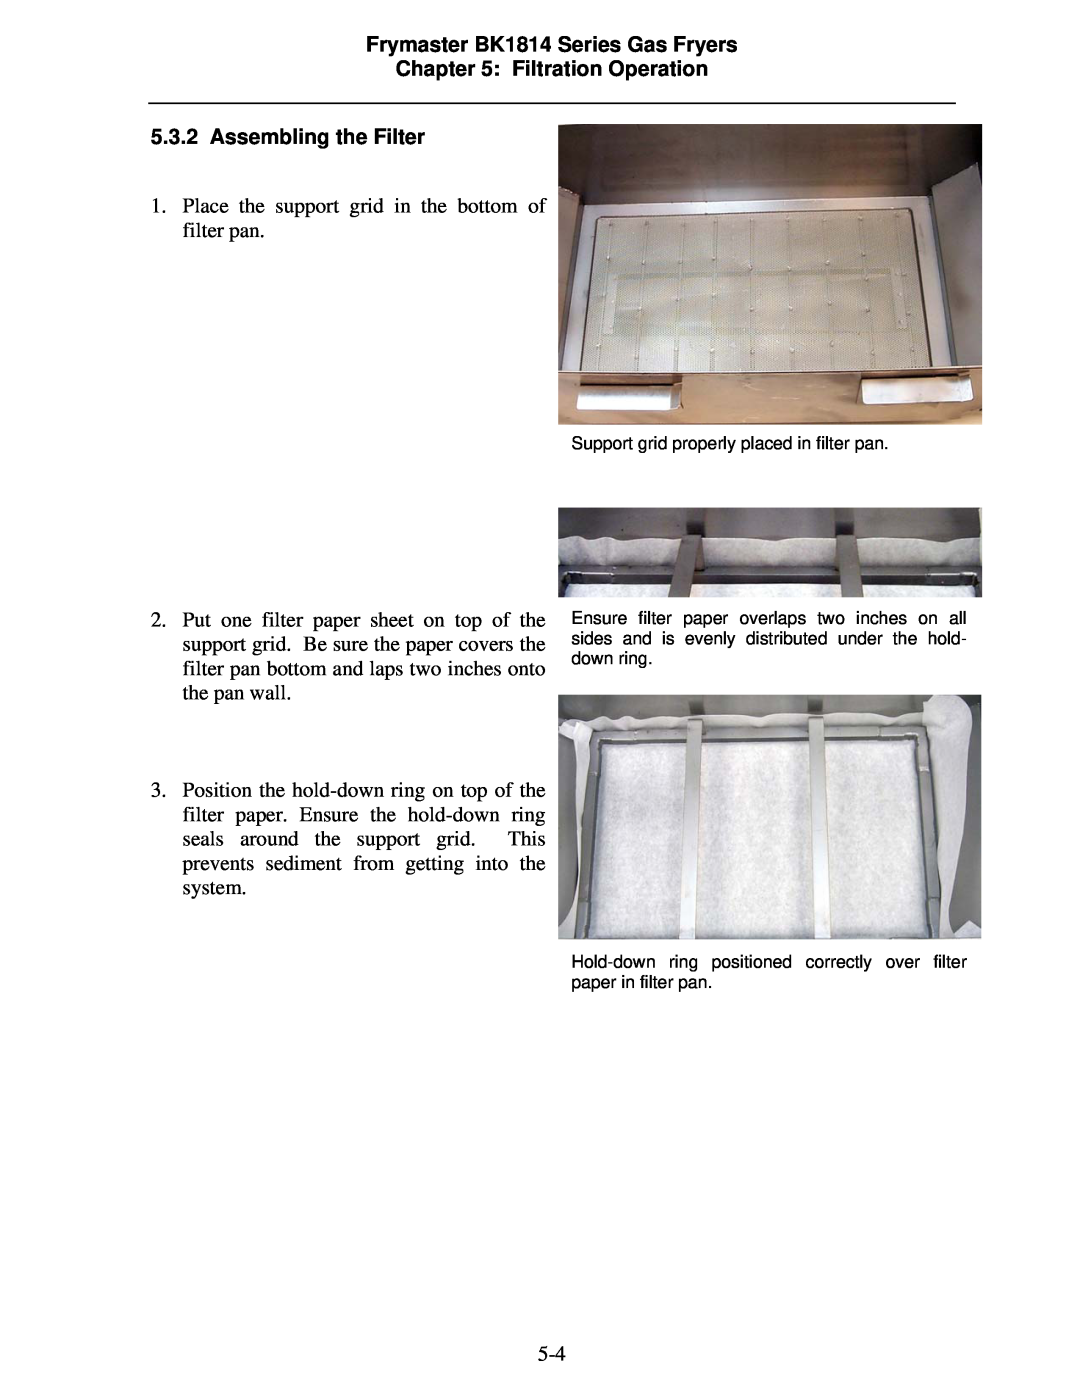 Frymaster BK1814 operation manual Place the support grid in the bottom of filter pan 